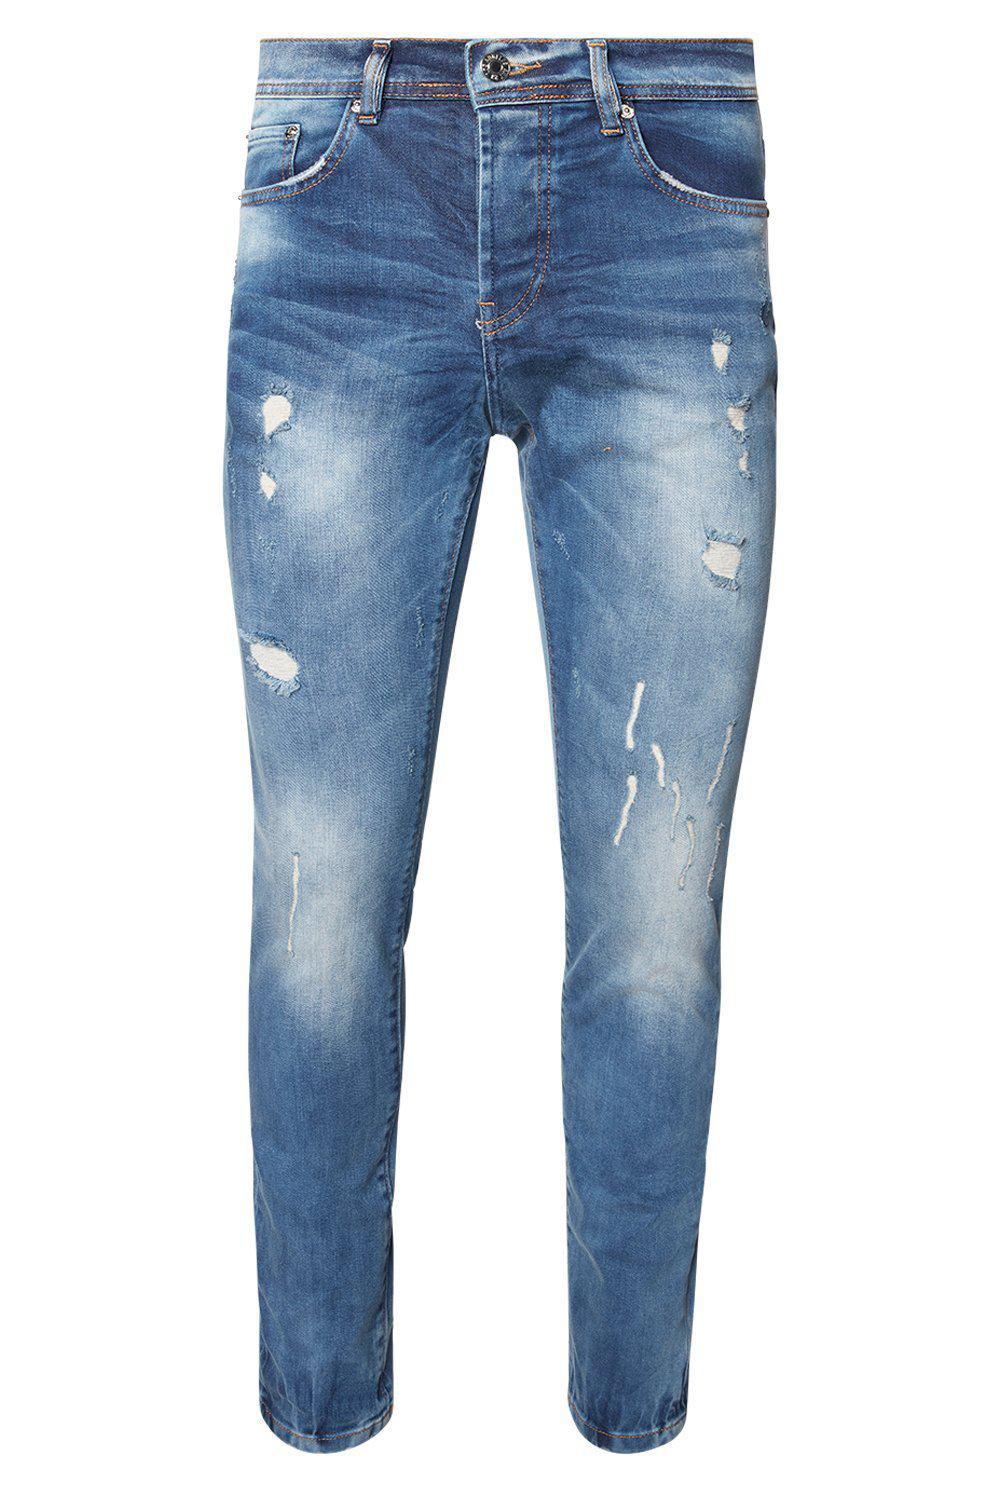 DISTRESSED SLIM TAPERED NAVY JEANS - Ron Tomson